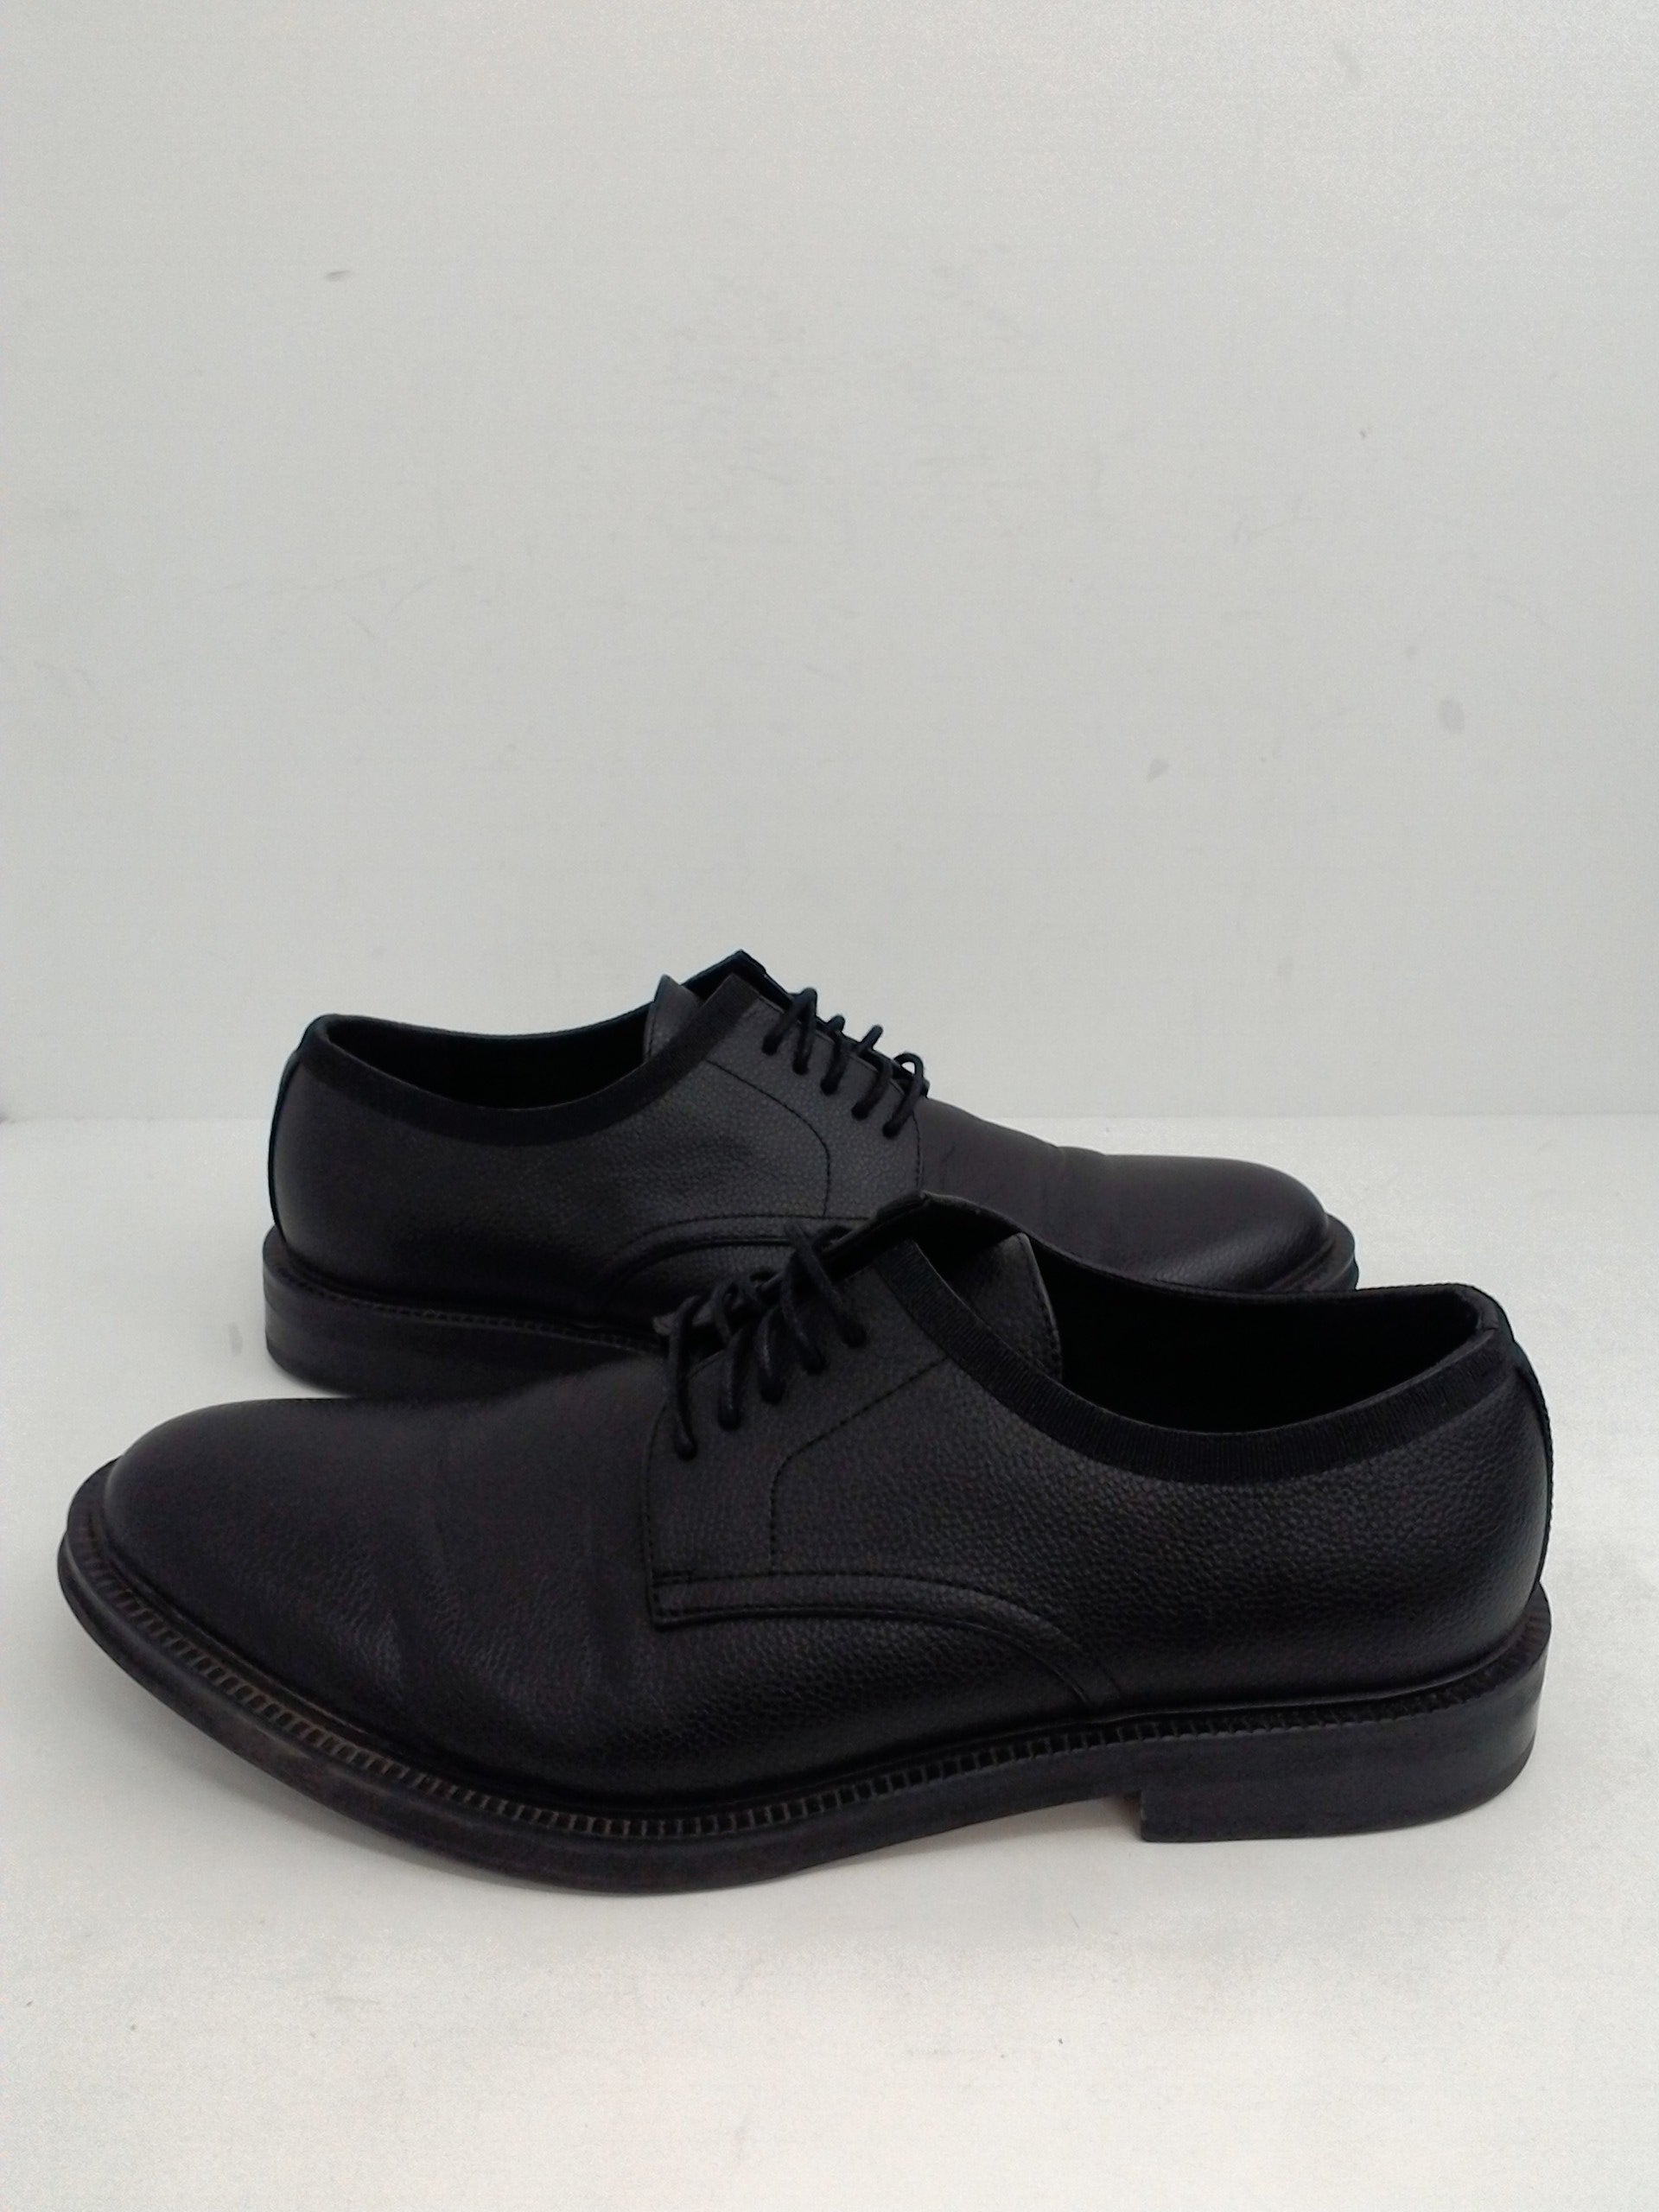 Kenneth Cole Reaction Men's Oxfords, Black Size 12 M - Prime Shoes and More